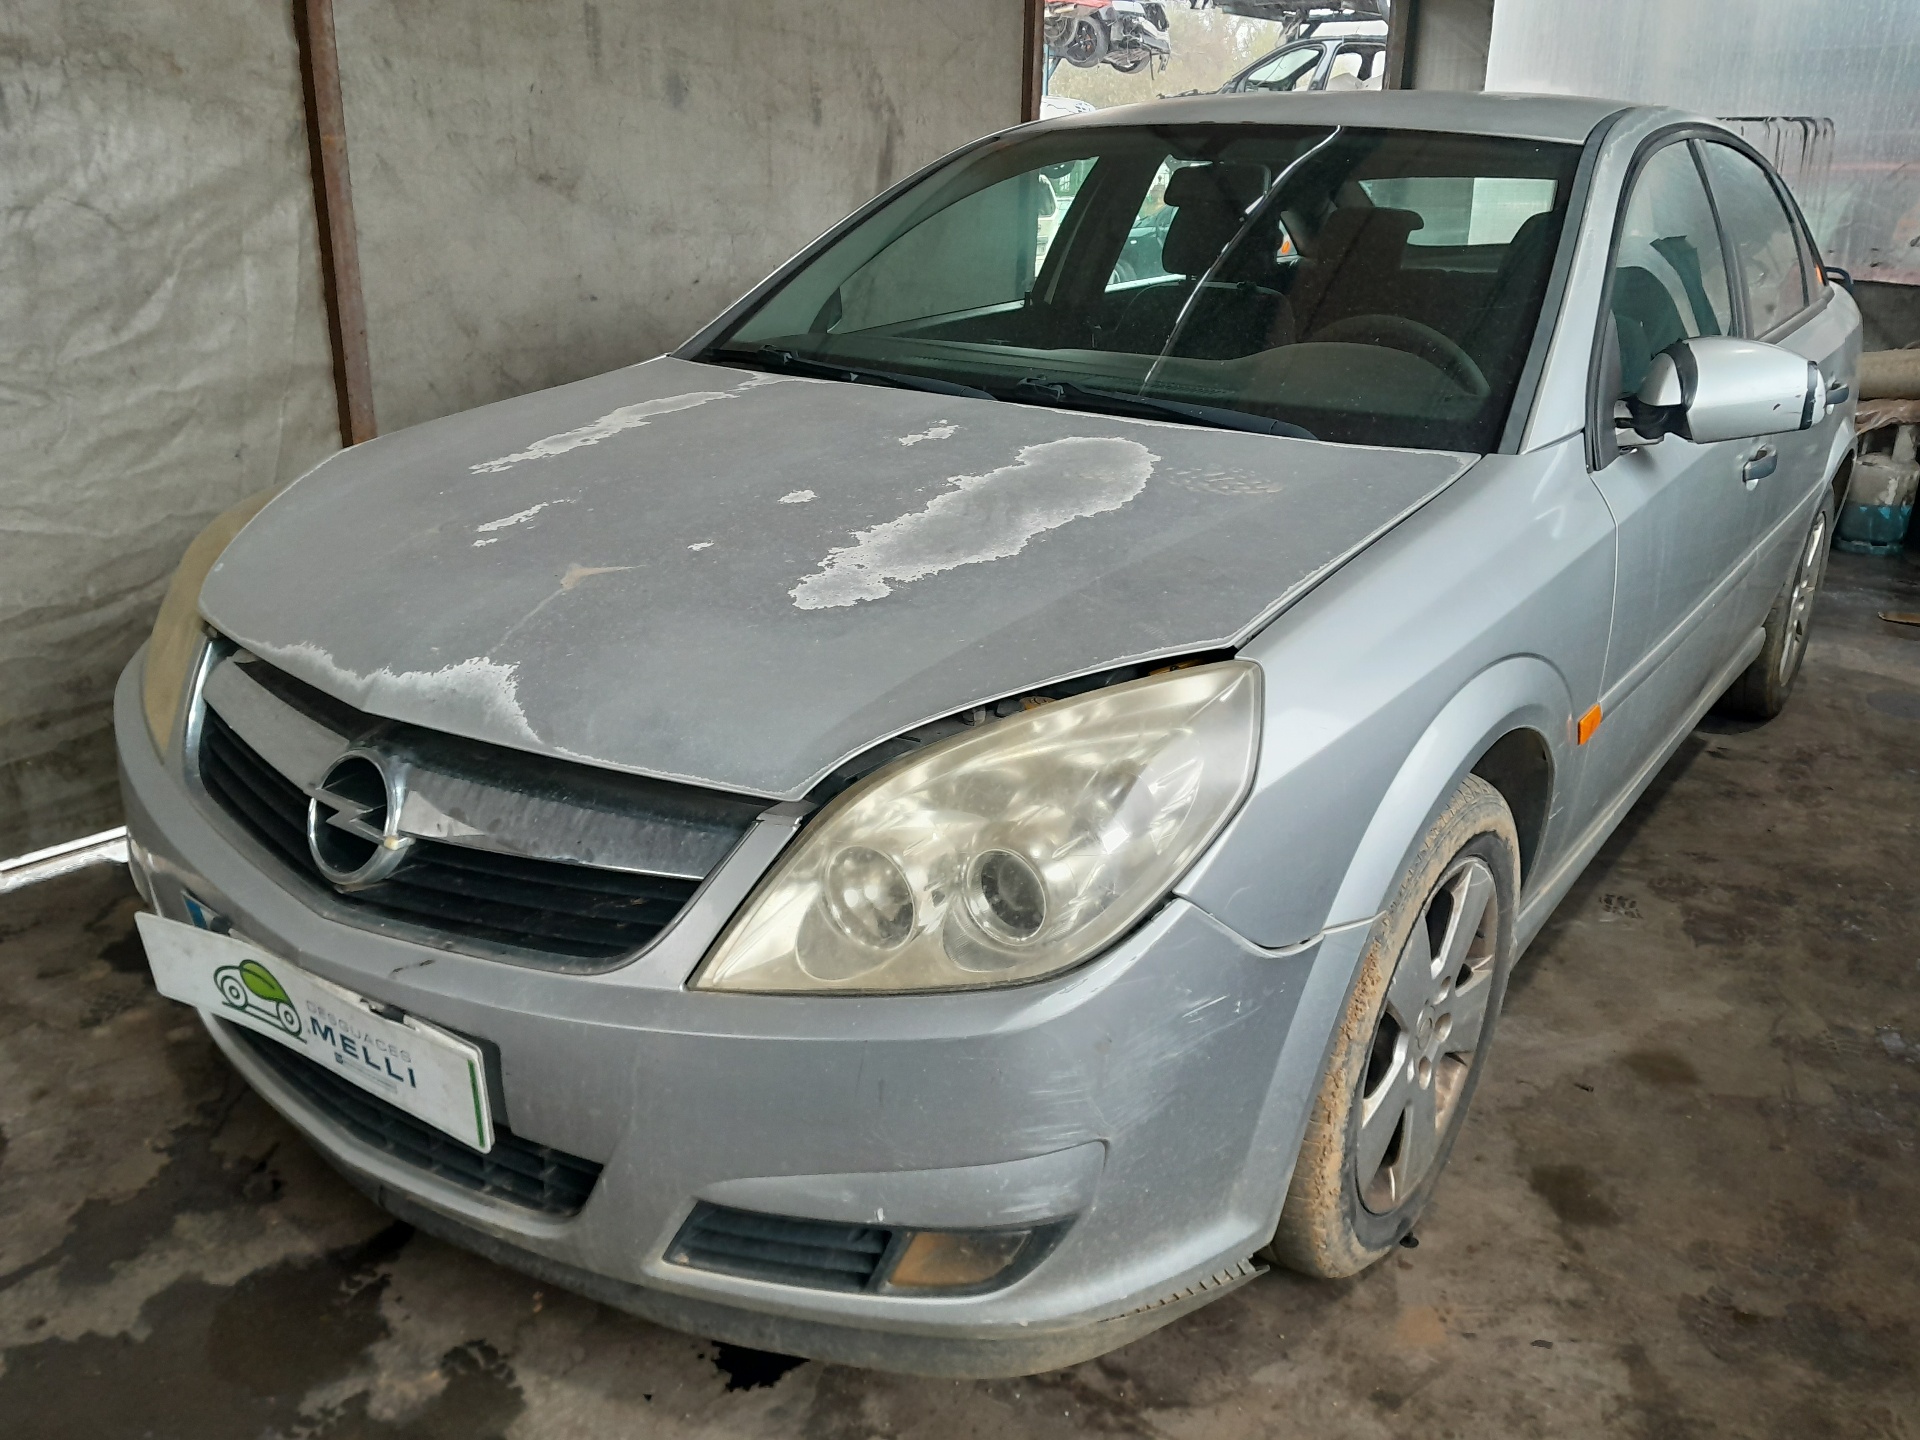 OPEL Vectra Other Body Parts 9186724 23971871